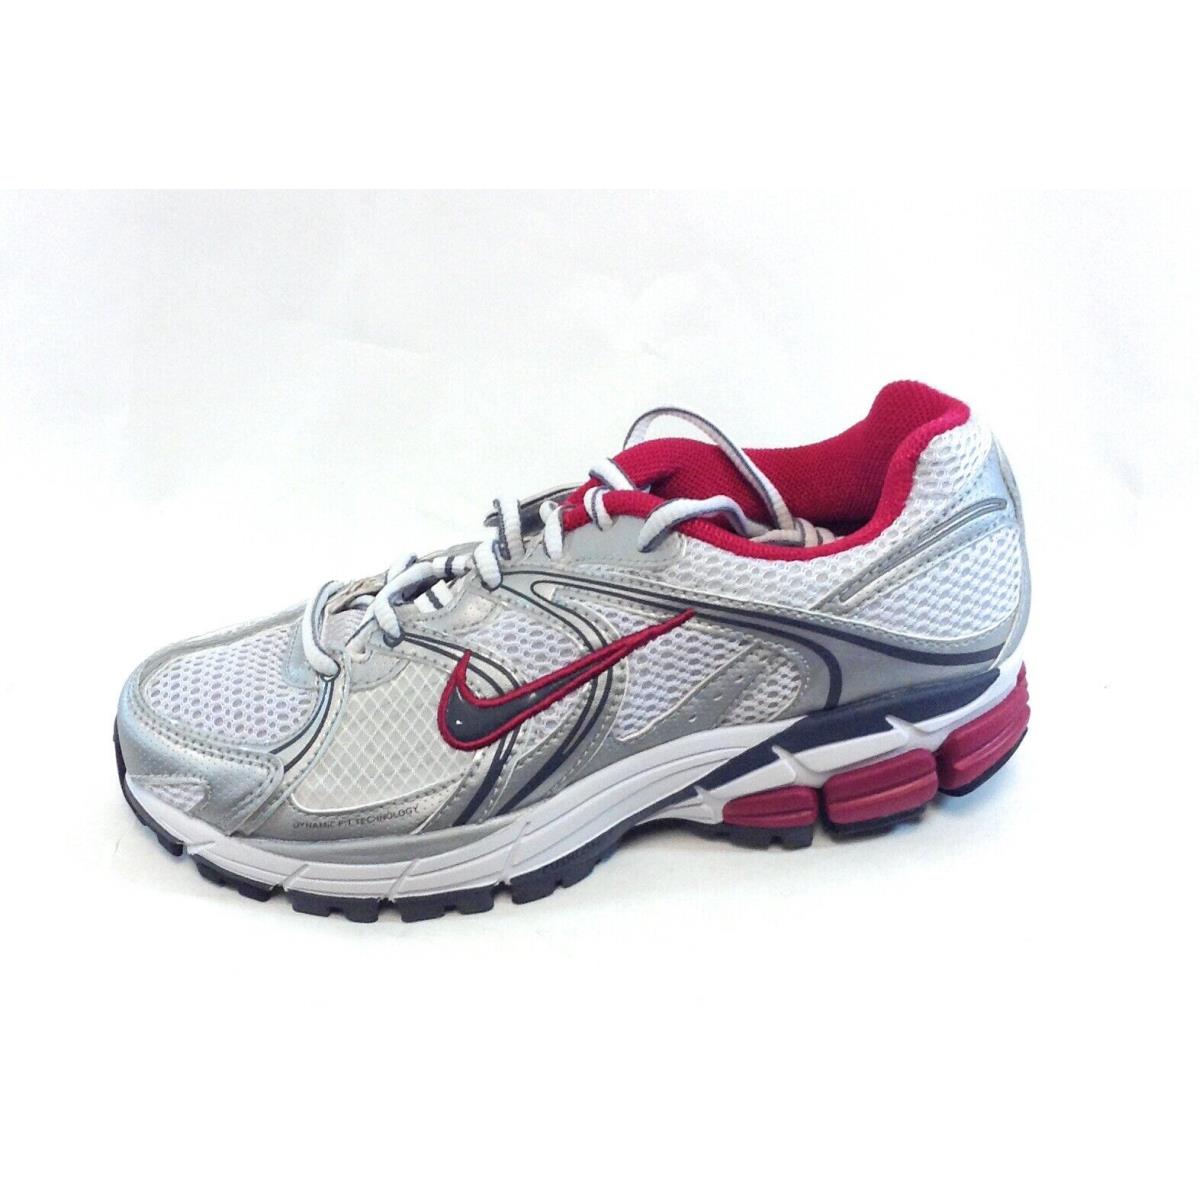 Nike Air + 3 101 White Red 2008 Deadstock Sneakers Shoes | 883212412614 - Nike shoes - White SporTipTop